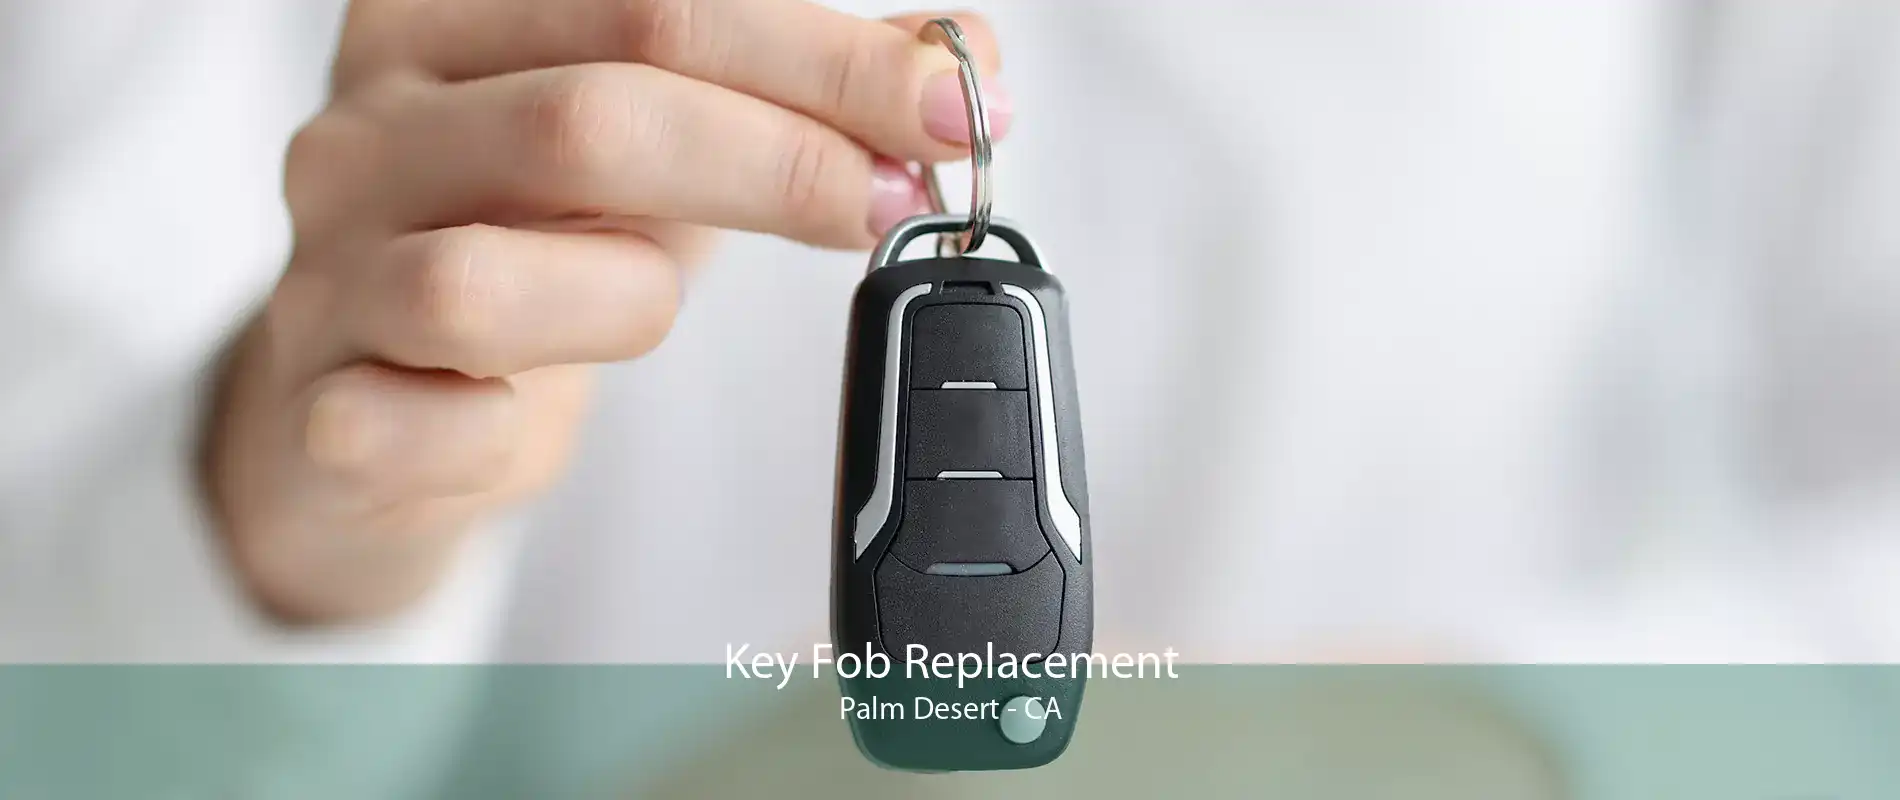 Key Fob Replacement Palm Desert - CA